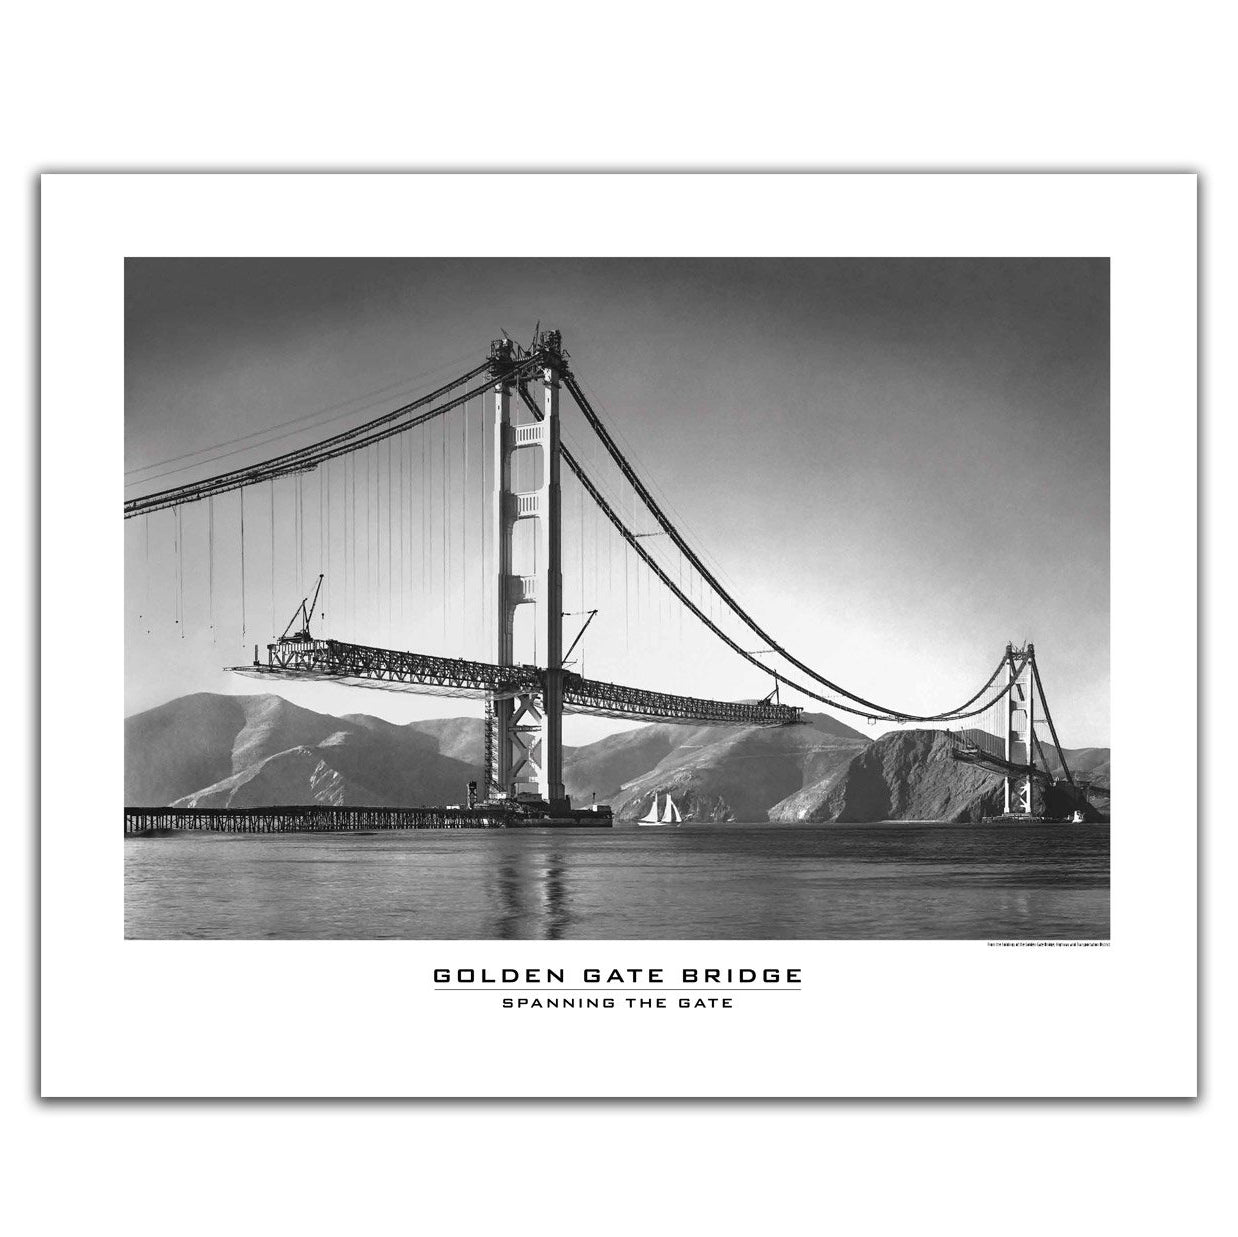 20 x 26 inch Golden Gate Bridge poster, featuring black-and-white historical photograph of span during construction.